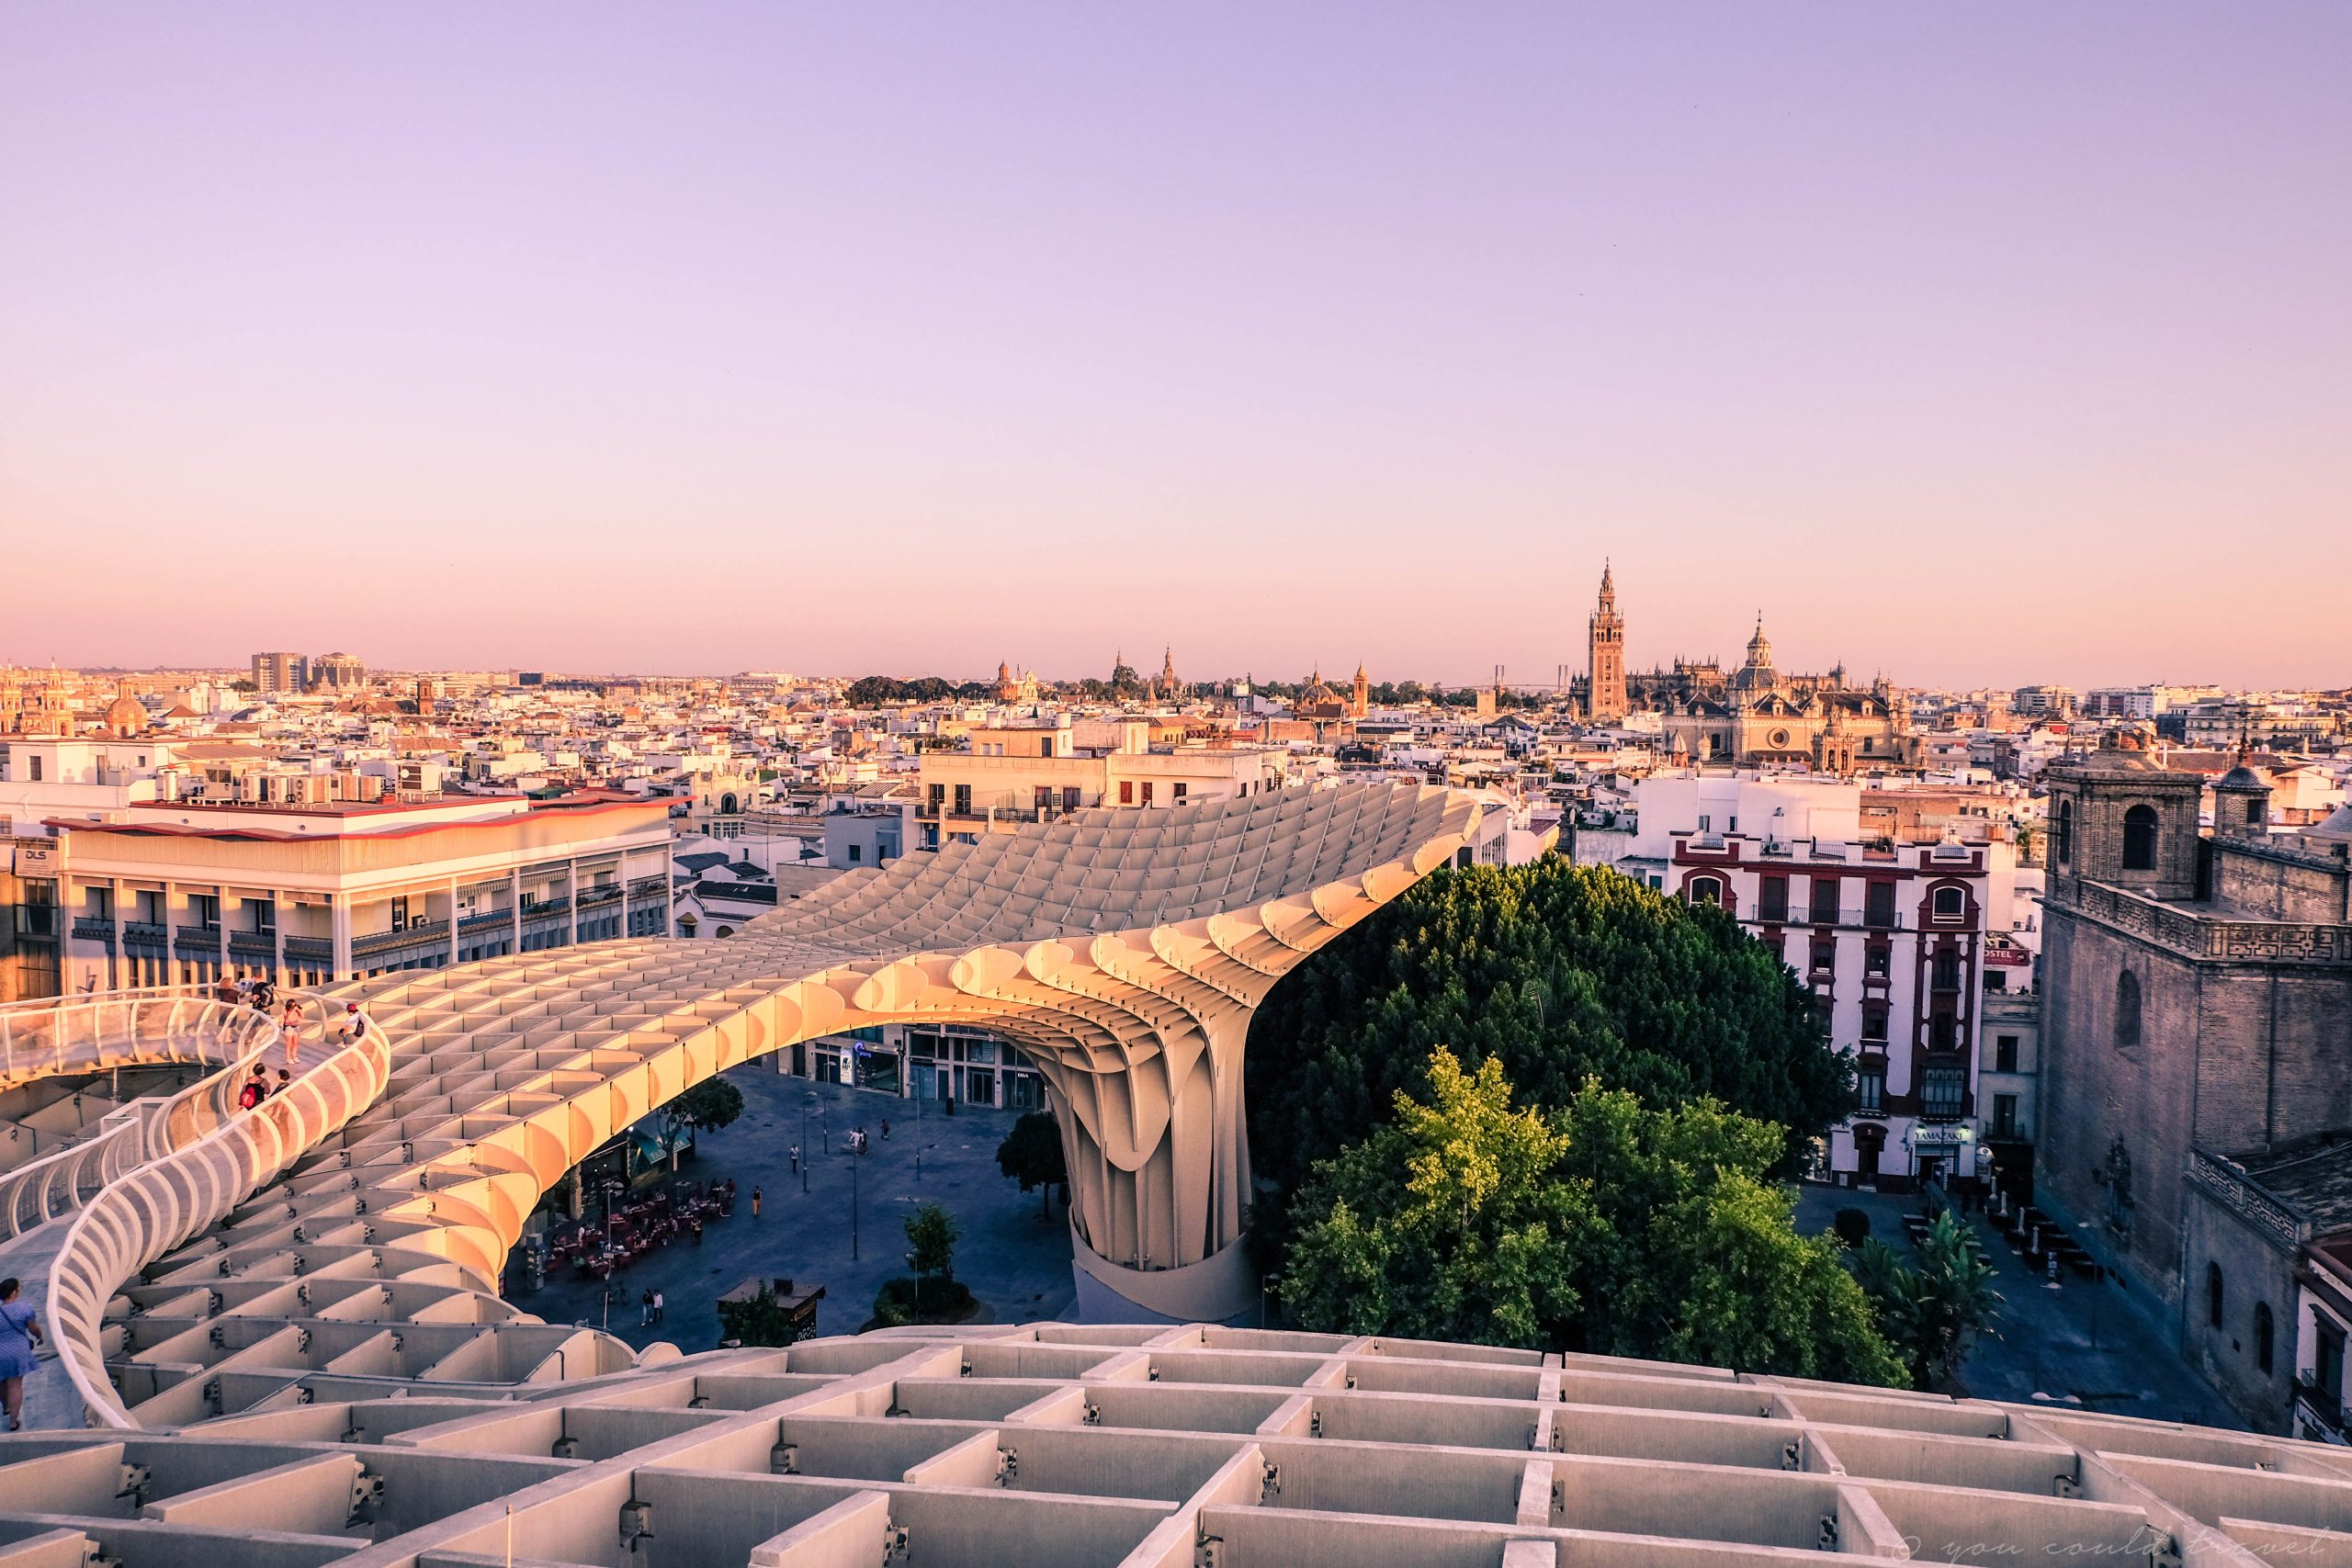 A beautiful vista of Seville as seen from one of its main tourist attractions called the Setas of Seville